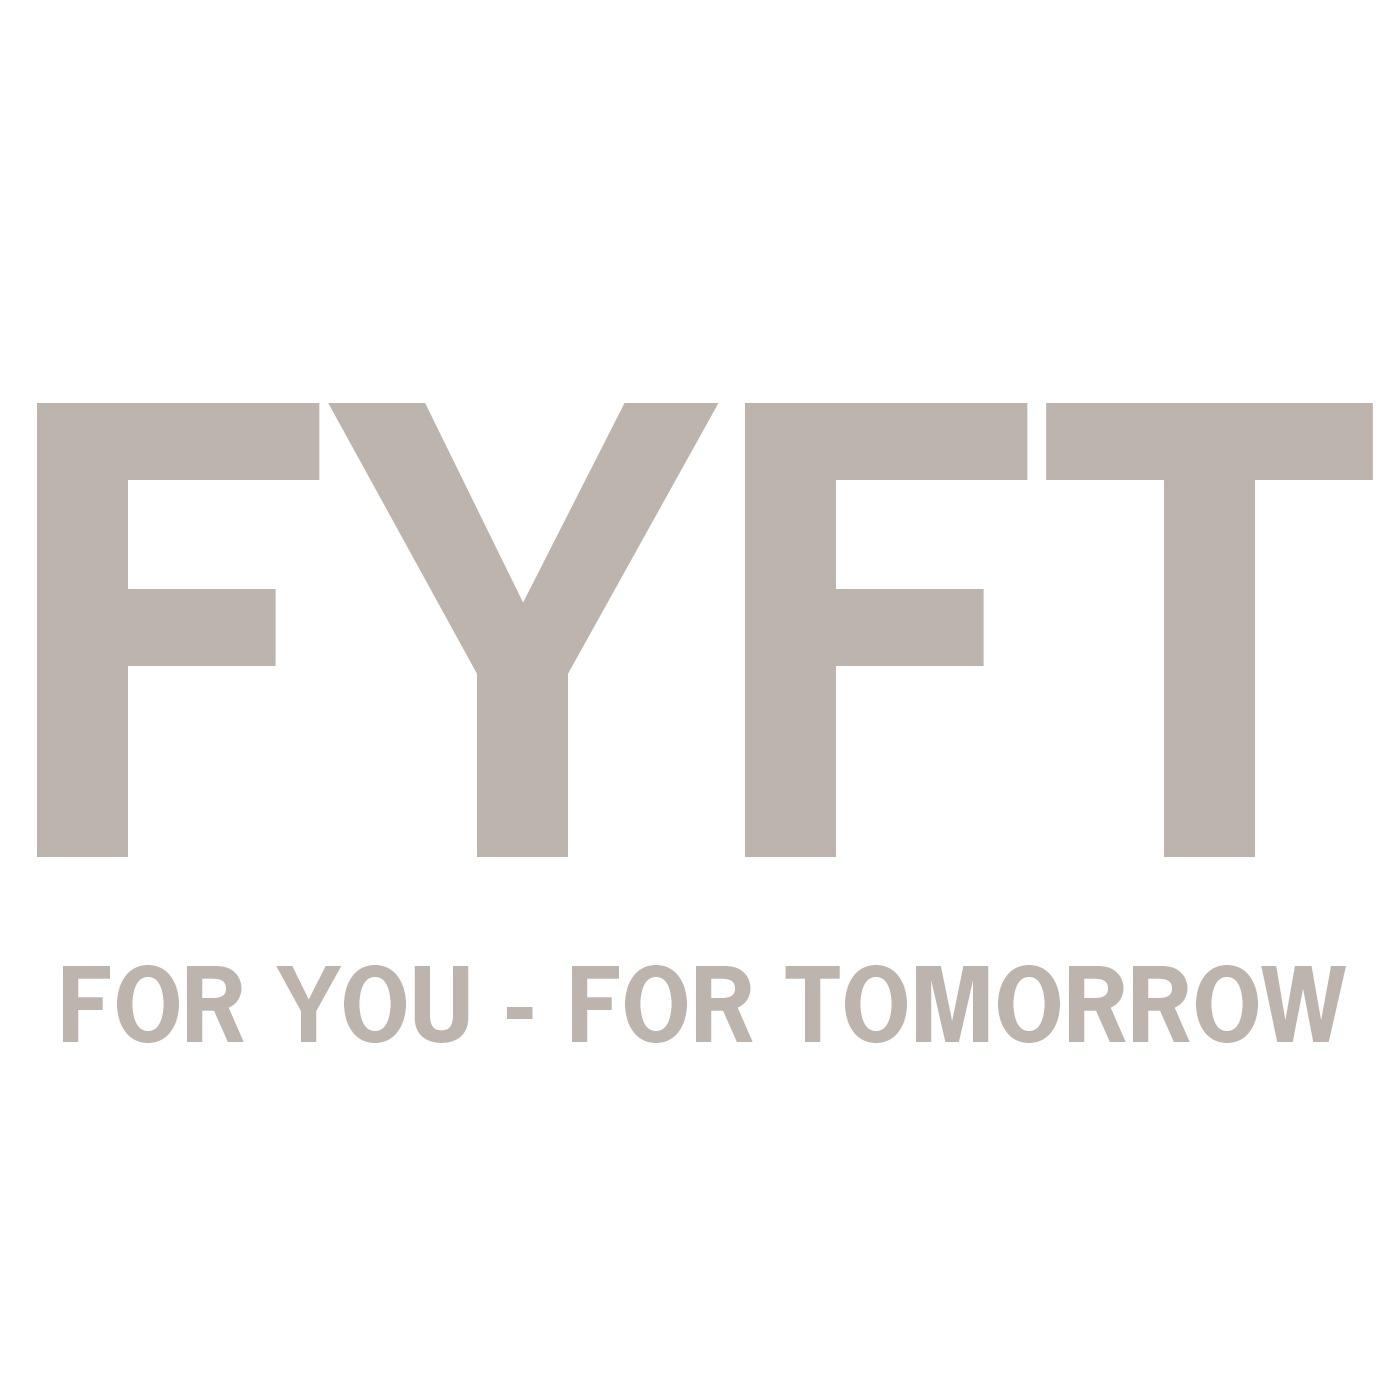 FYFT - For You For Tomorrow